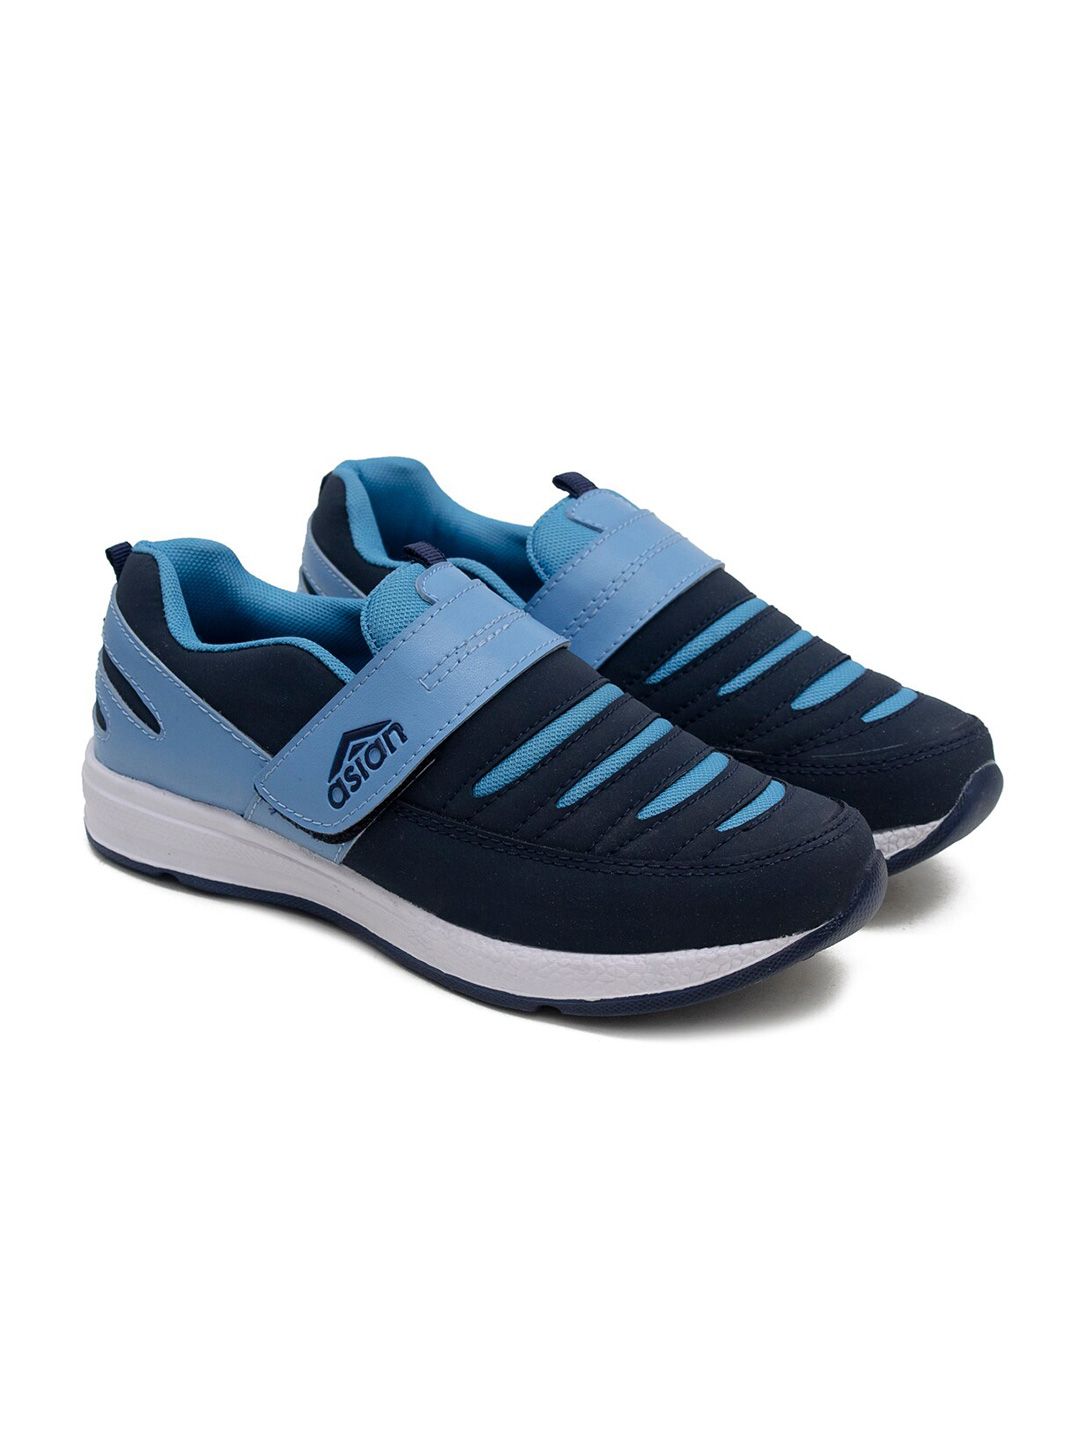 ASIAN Women Navy Blue Mesh Running Shoes Price in India